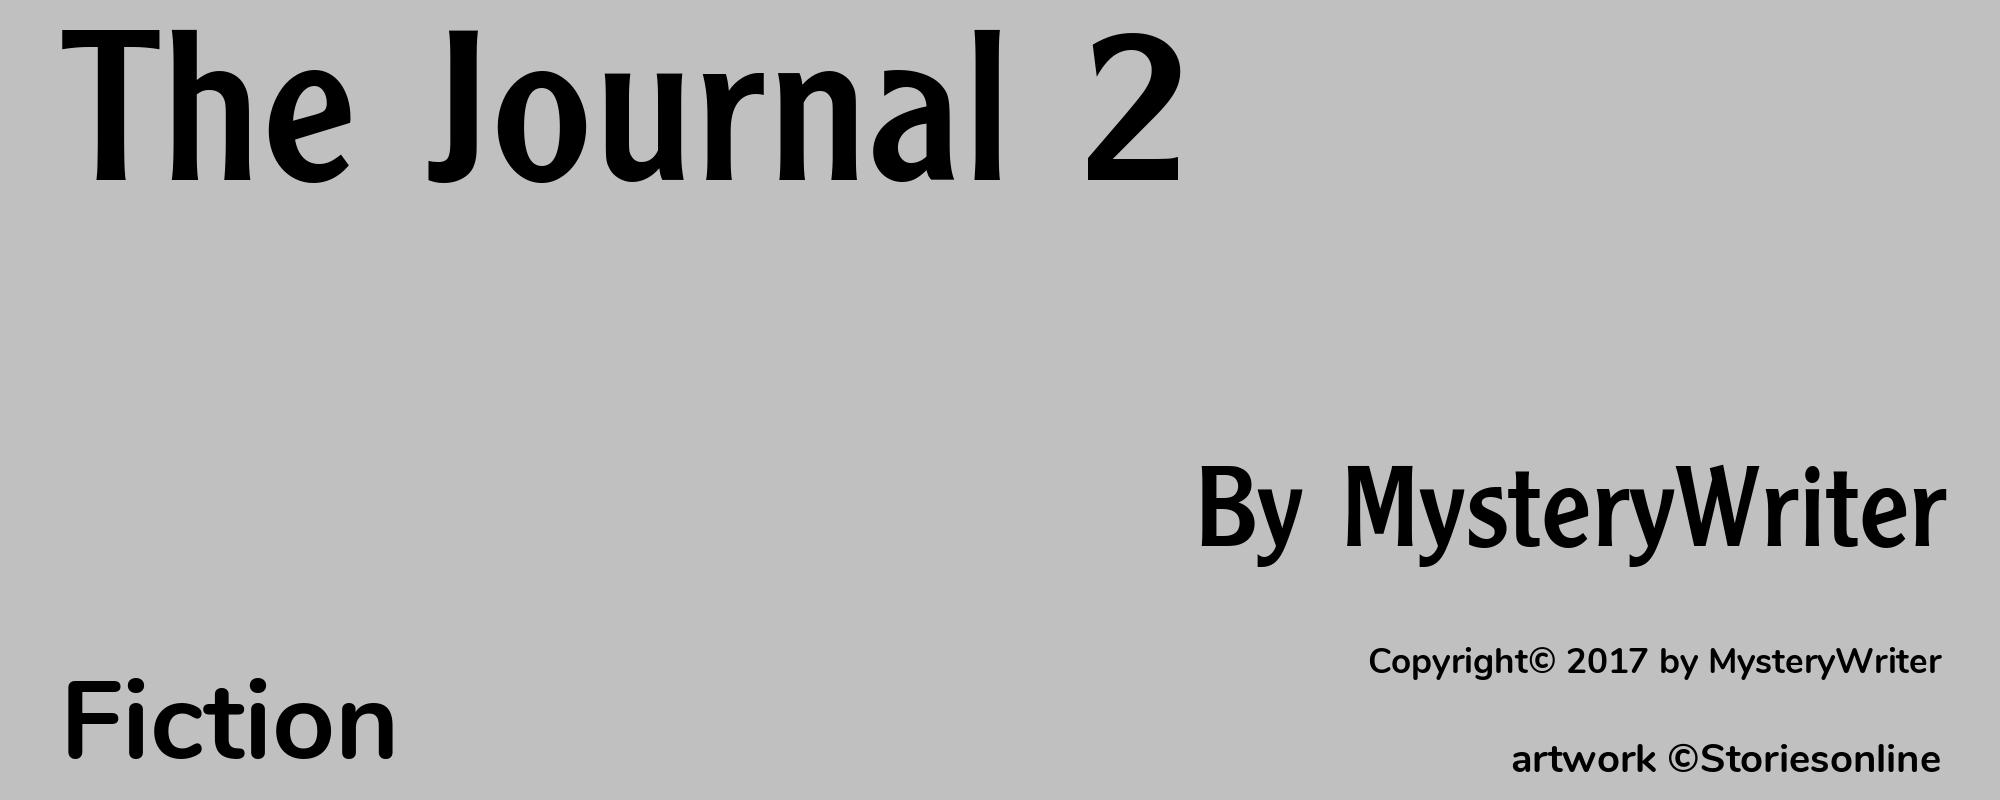 The Journal 2 - Cover